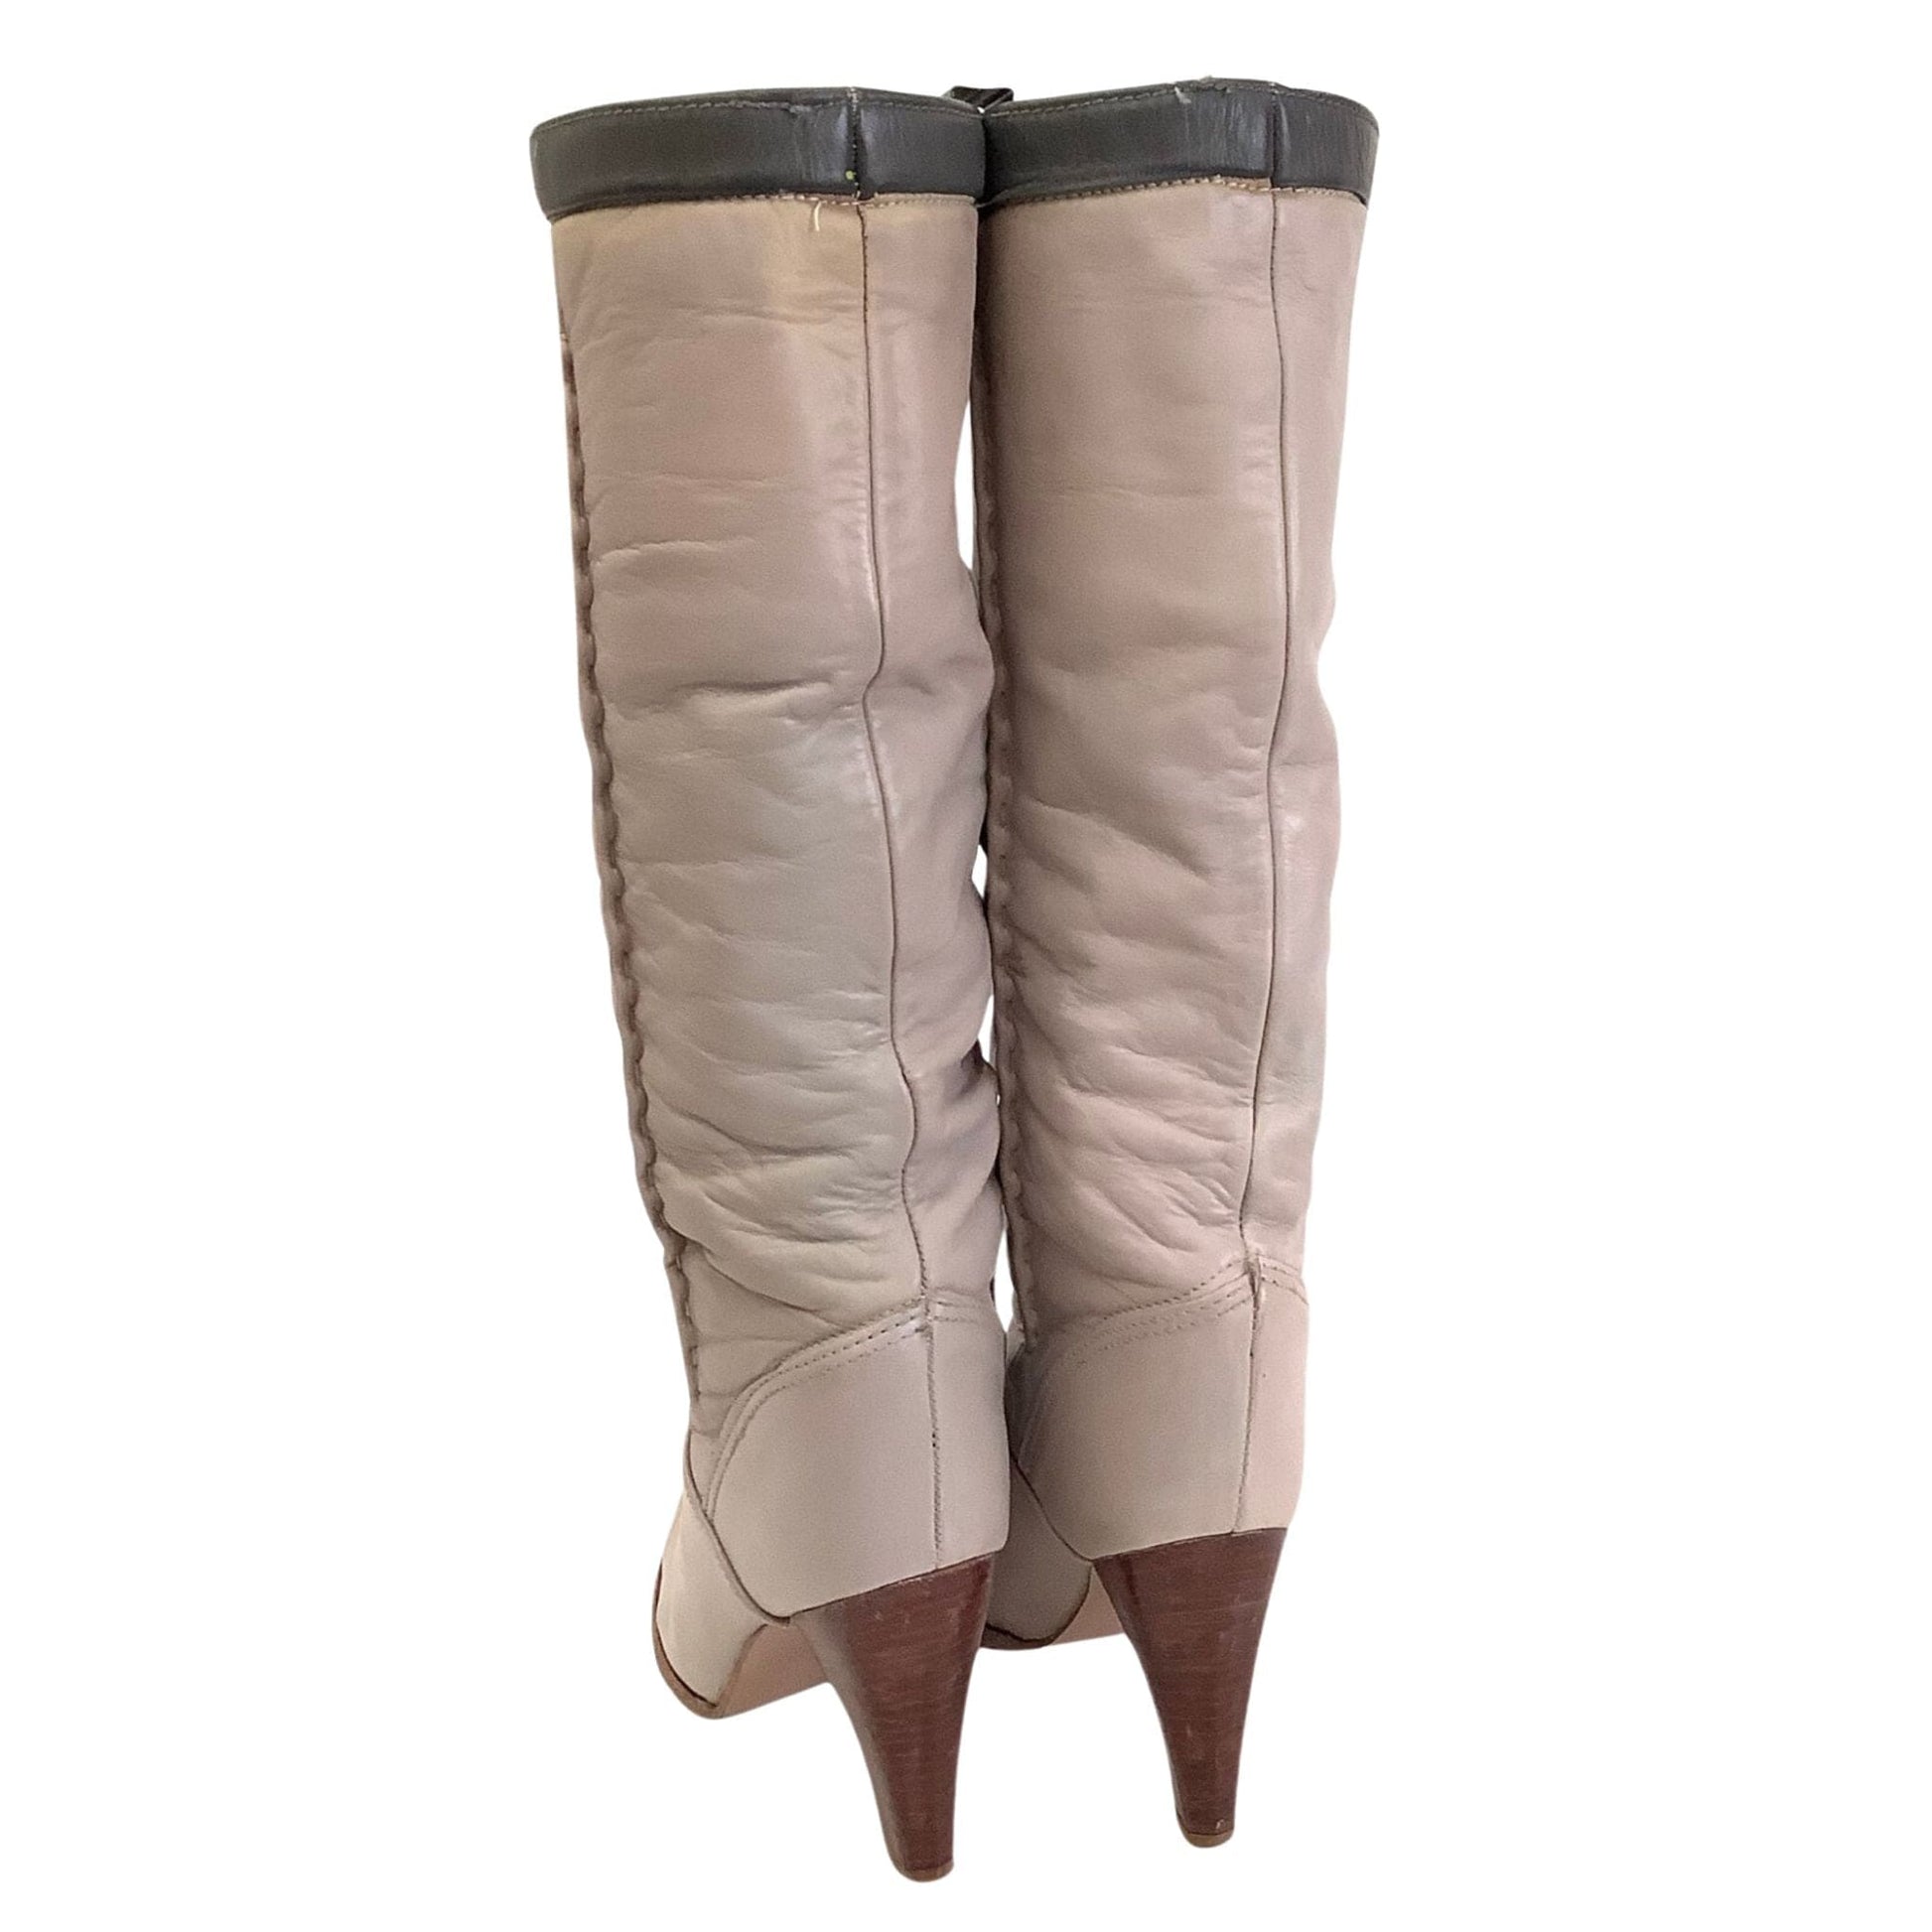 Zodiac Slouchy Boots 7.5 / Taupe / Vintage 1980s